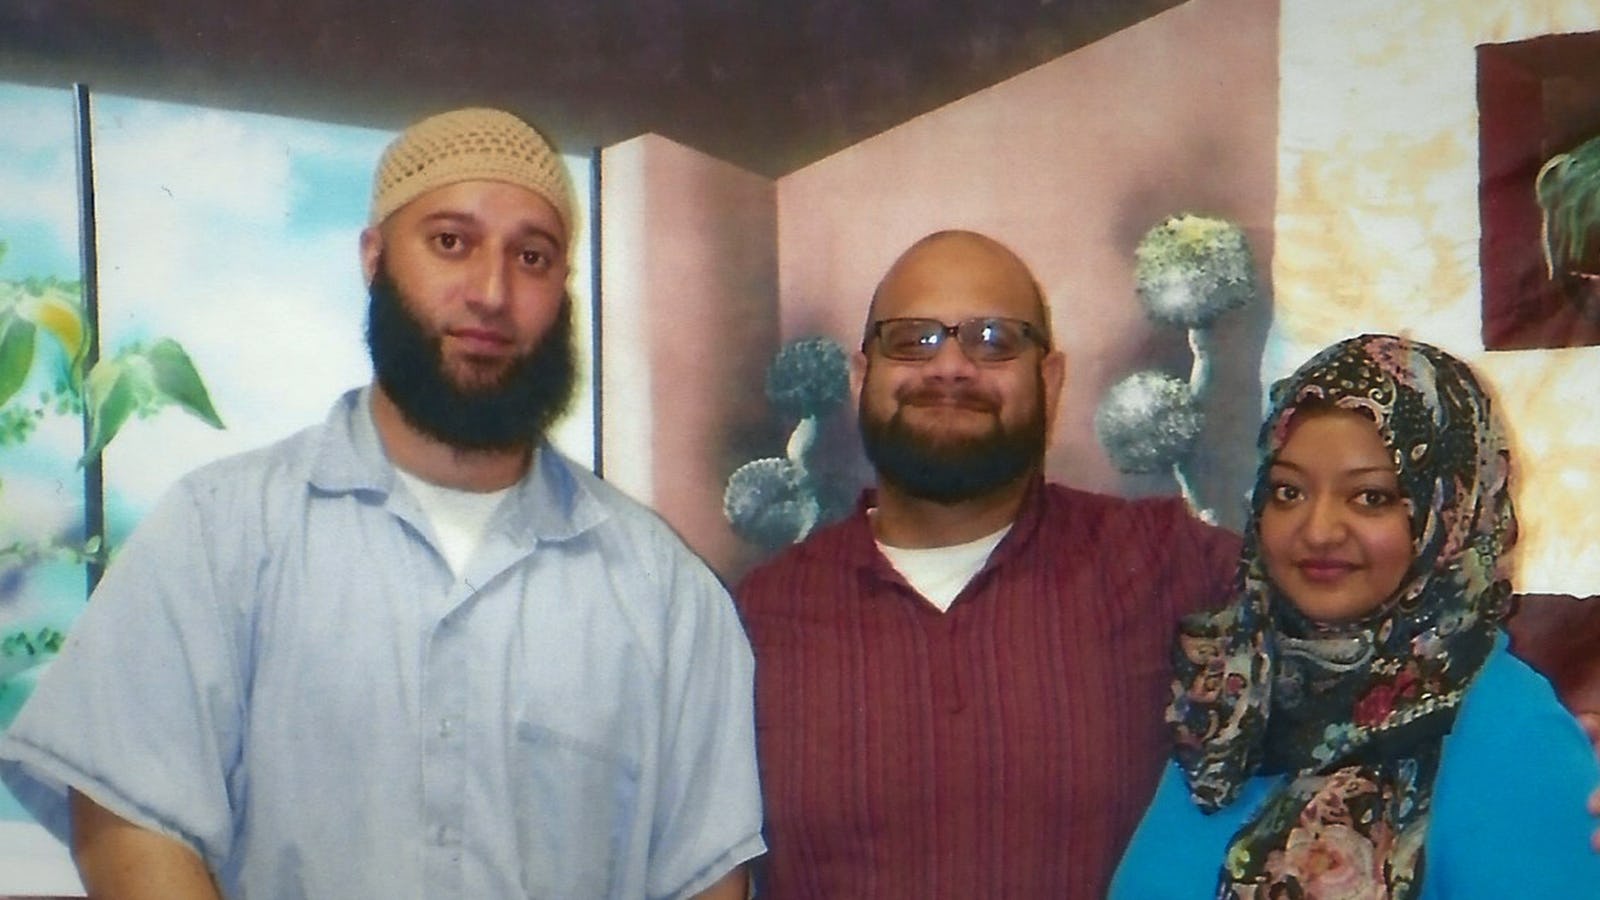 Will Adnan Syed Get A New Trial? His Lawyer Says They're Exploring